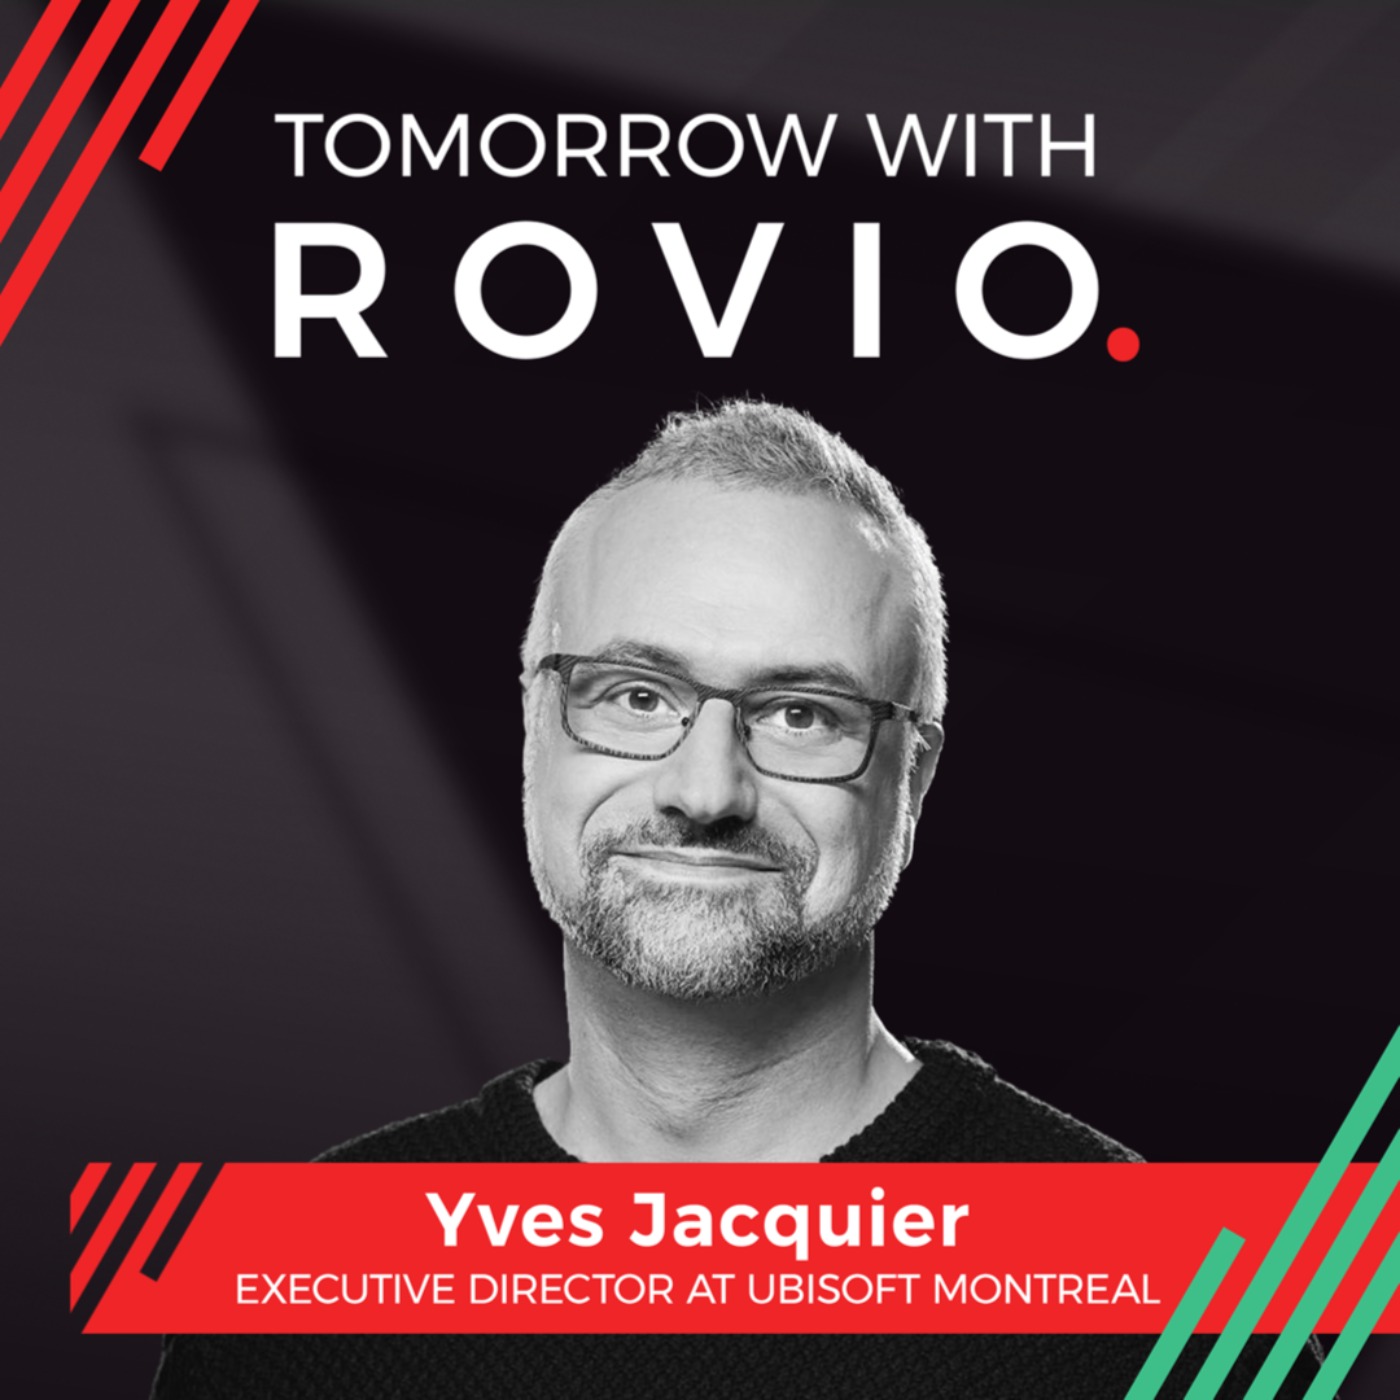 Yves Jacquier - Executive Director at Ubisoft Montreal - talks AI in game development